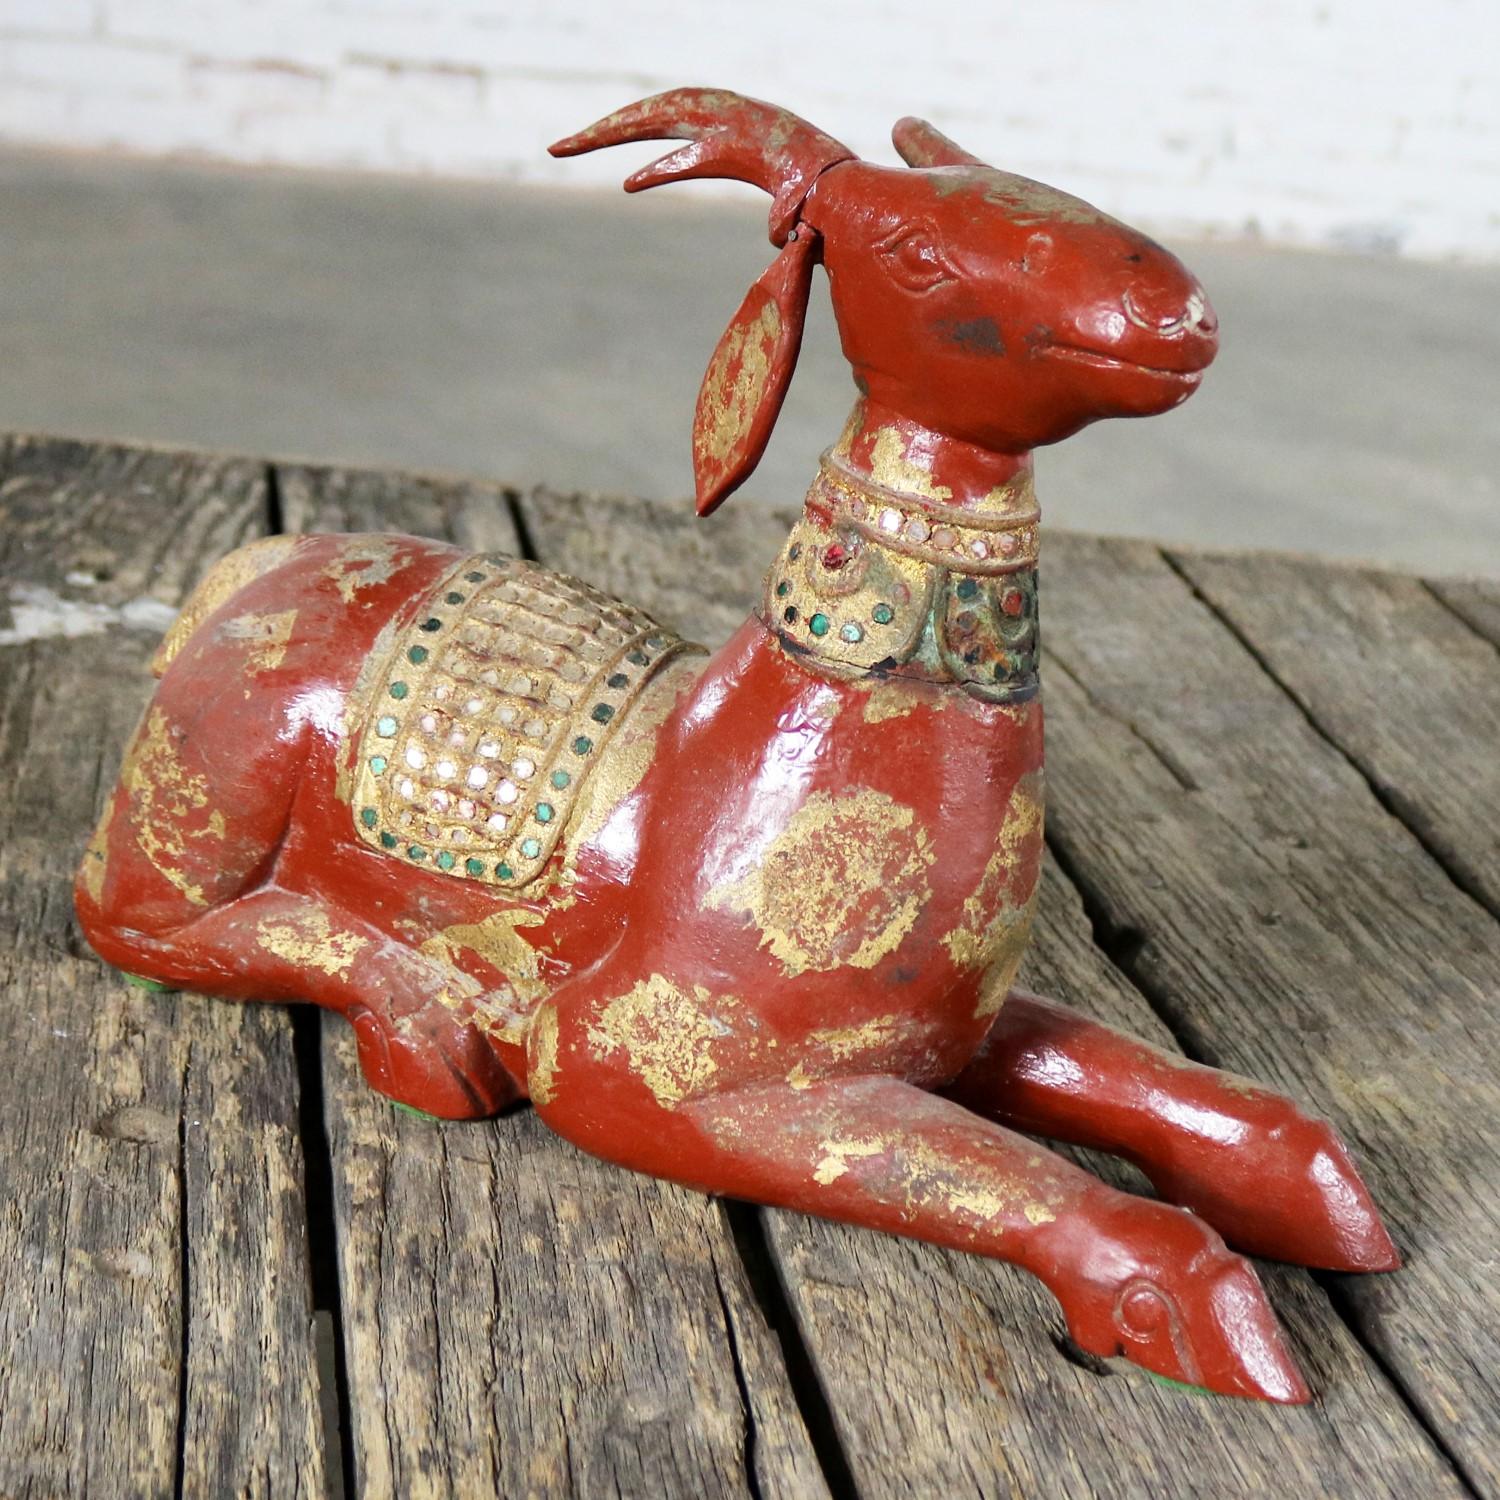 Beautiful carved wood recumbent deer from Thailand. Lacquered with a Chinese red or terracotta color and decorated with glass jewels, mirror, and gilding. It is in wonderful vintage condition, circa 20th century.

This carved wood recumbent deer